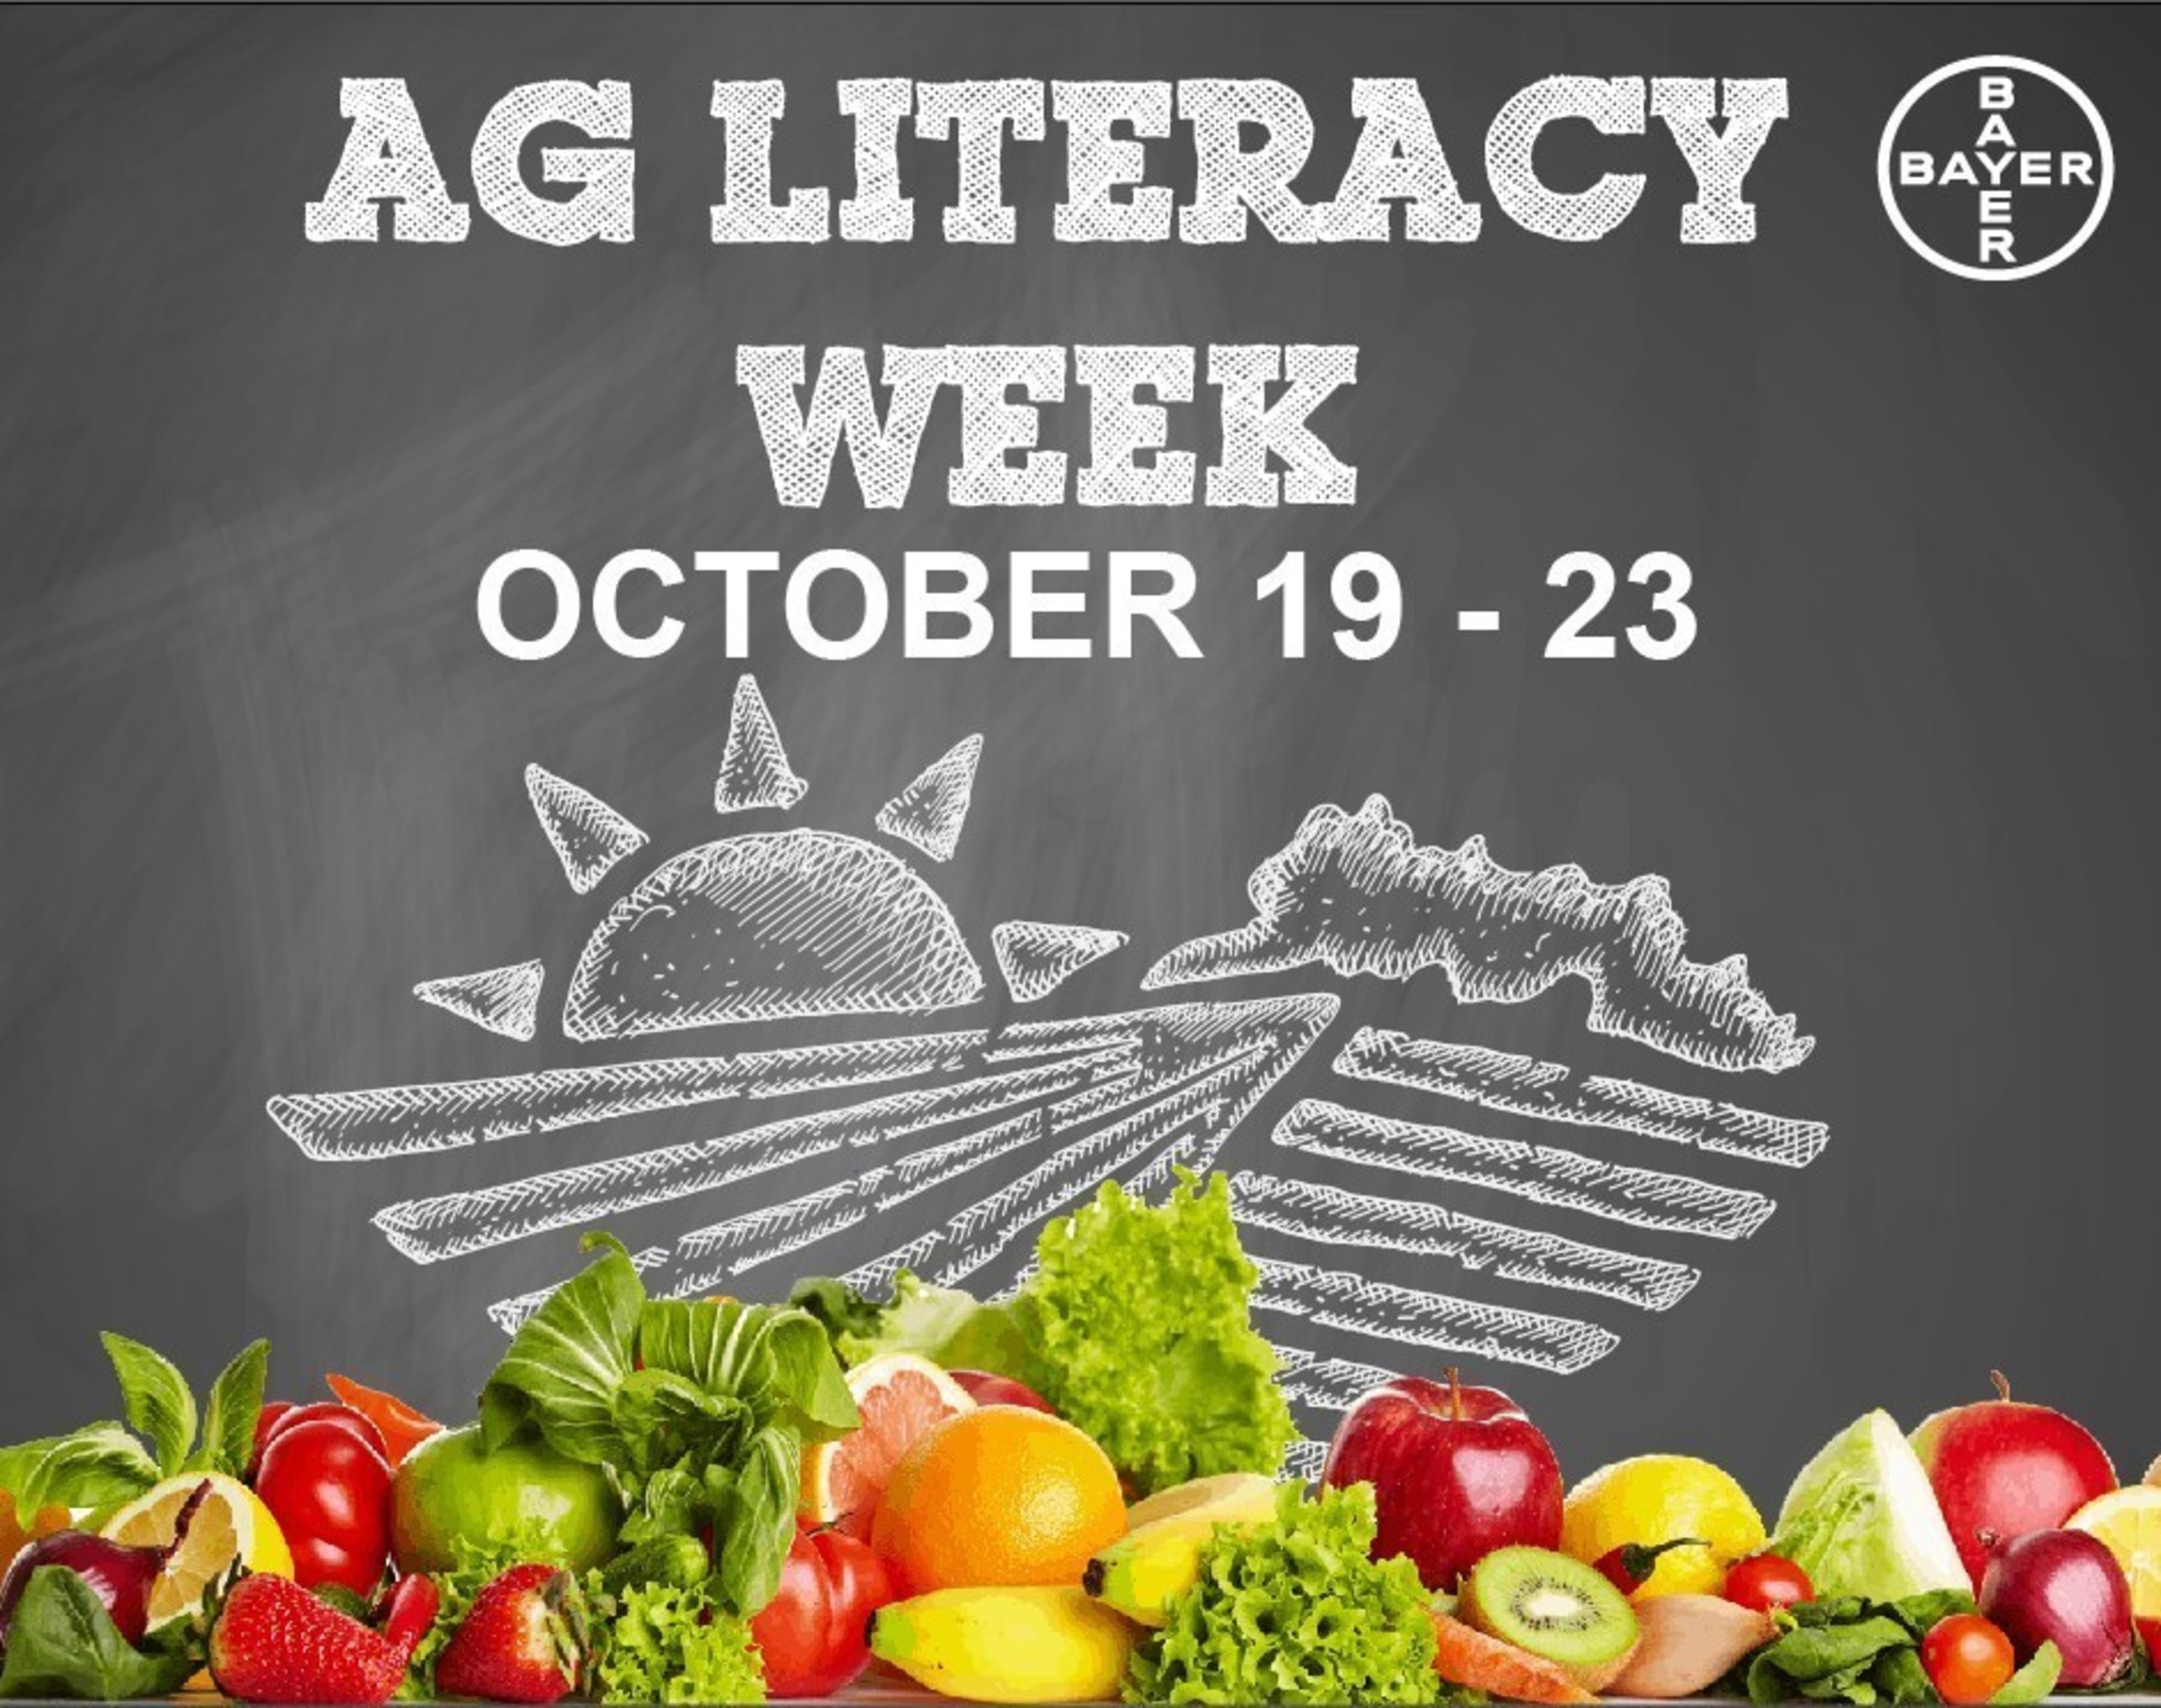 Ag Literacy Week is an educational initiative from Bayer whose purpose is to raise awareness to the importance of agriculture and technology. Through hands-on learning experiences, children and community stakeholders across the U.S. will engage with agriculture and STEM.